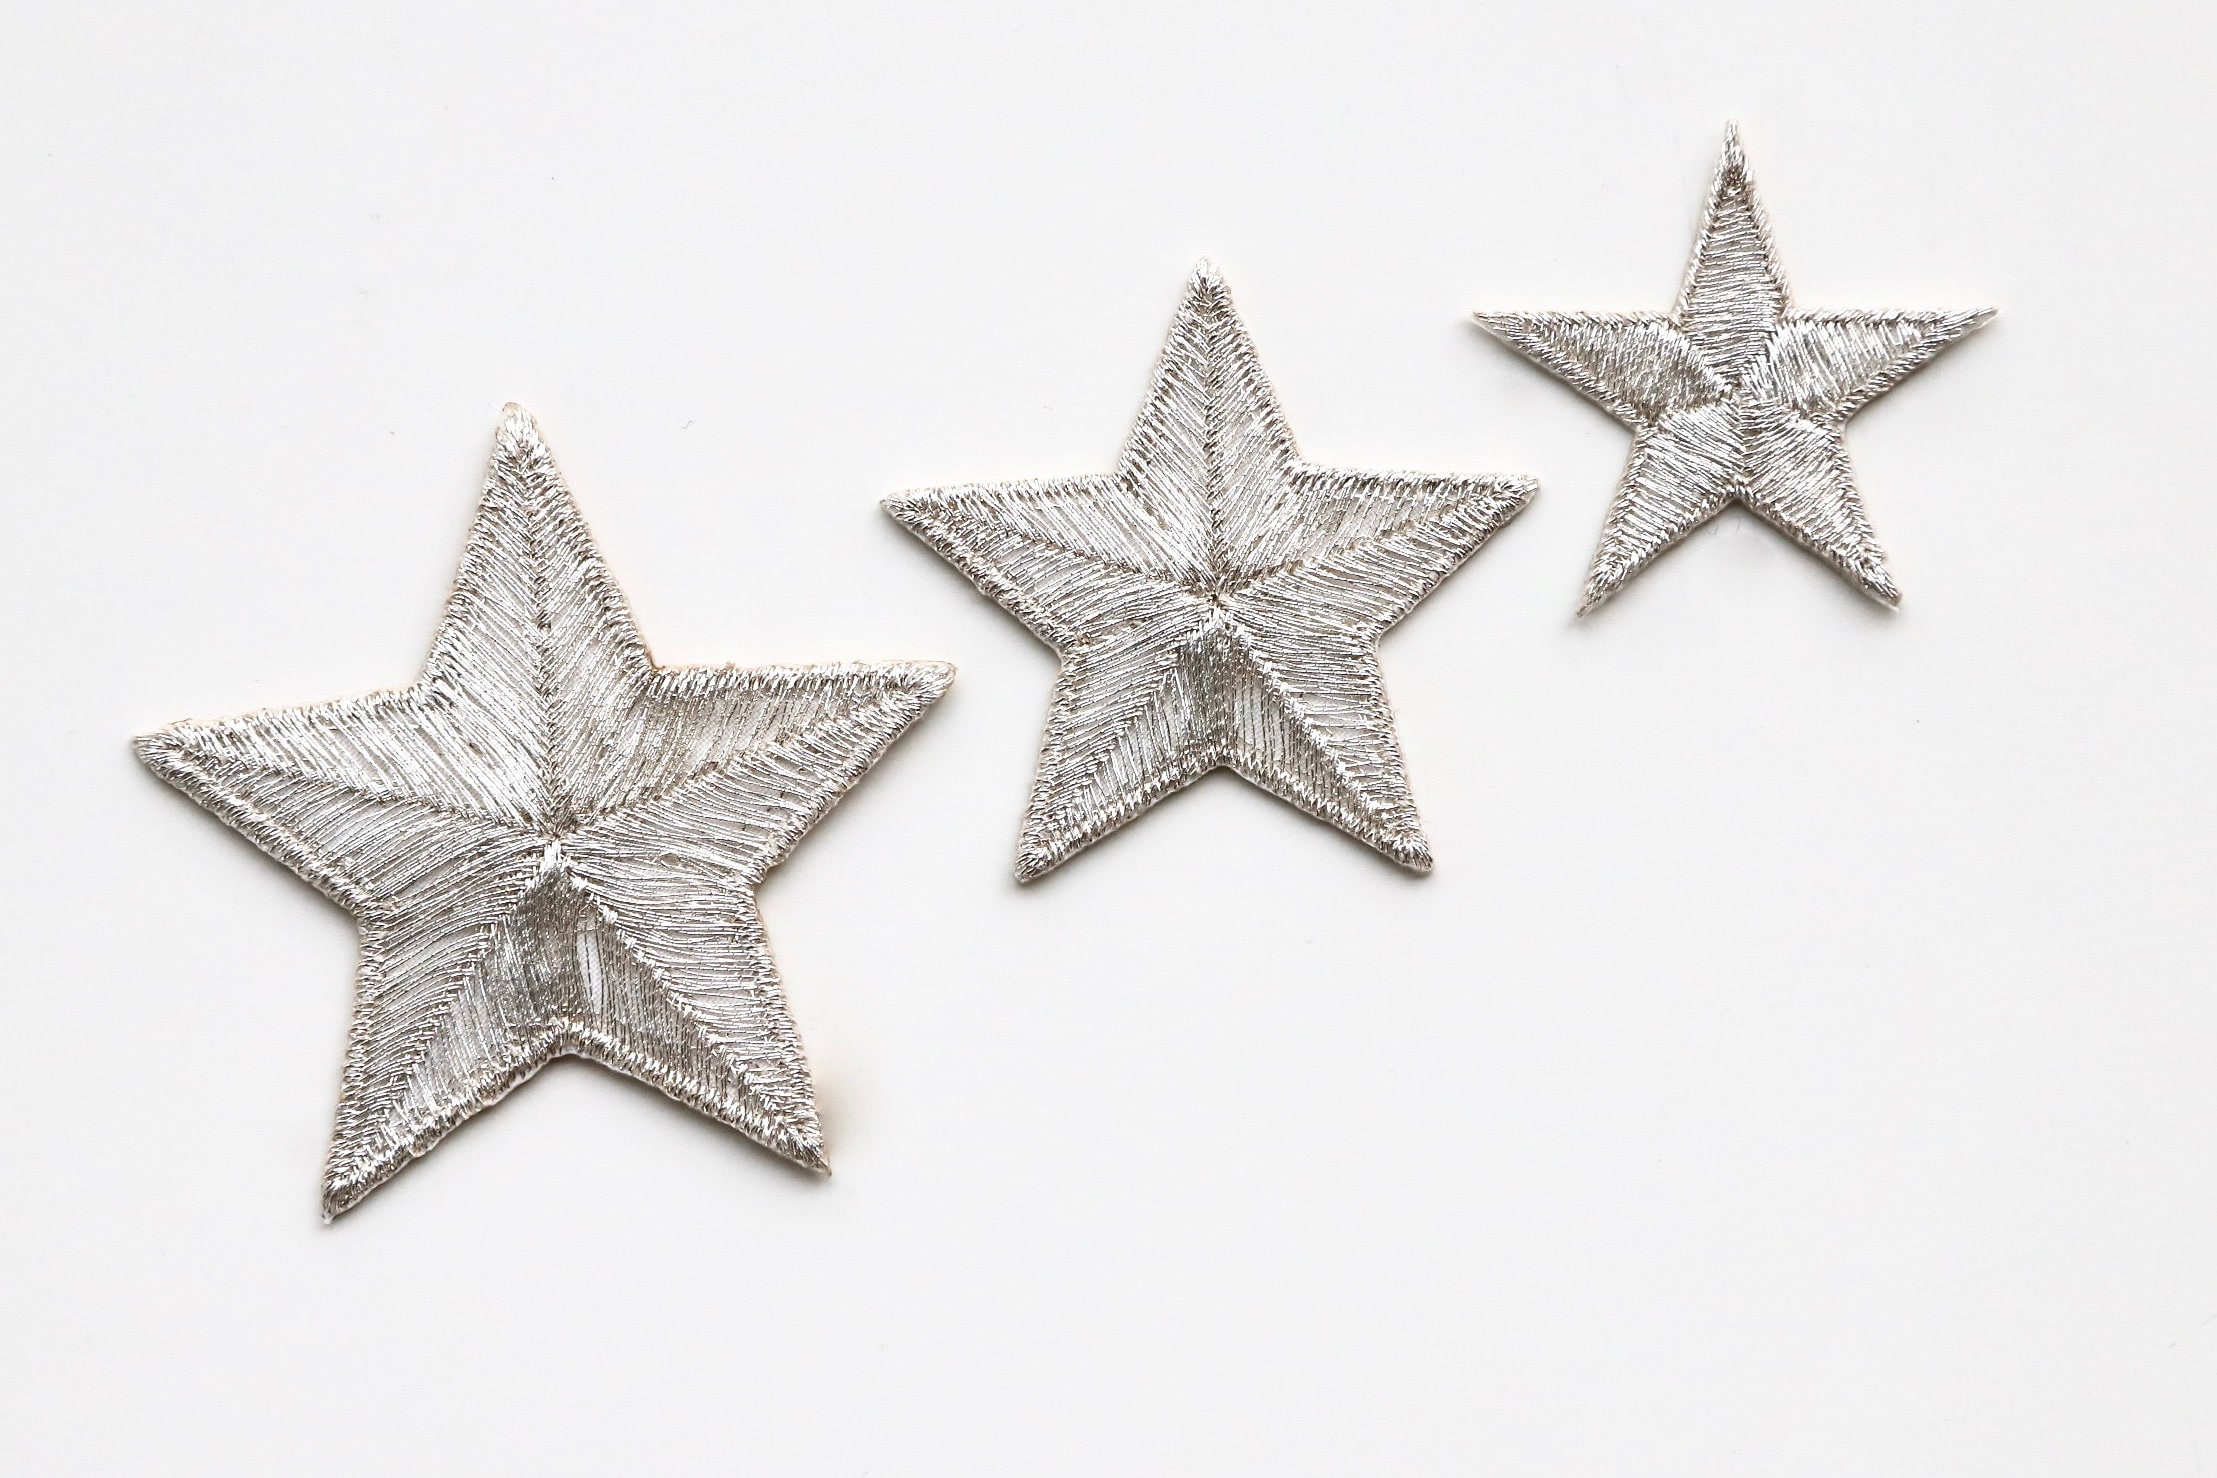  Gold Silver Cross Stars Embroidered Patches Sew Iron On Badges  Punk Gothic for Clothes Bag Coat Backpack DIY Appliques Craft Decoration  (Gold) : Arts, Crafts & Sewing